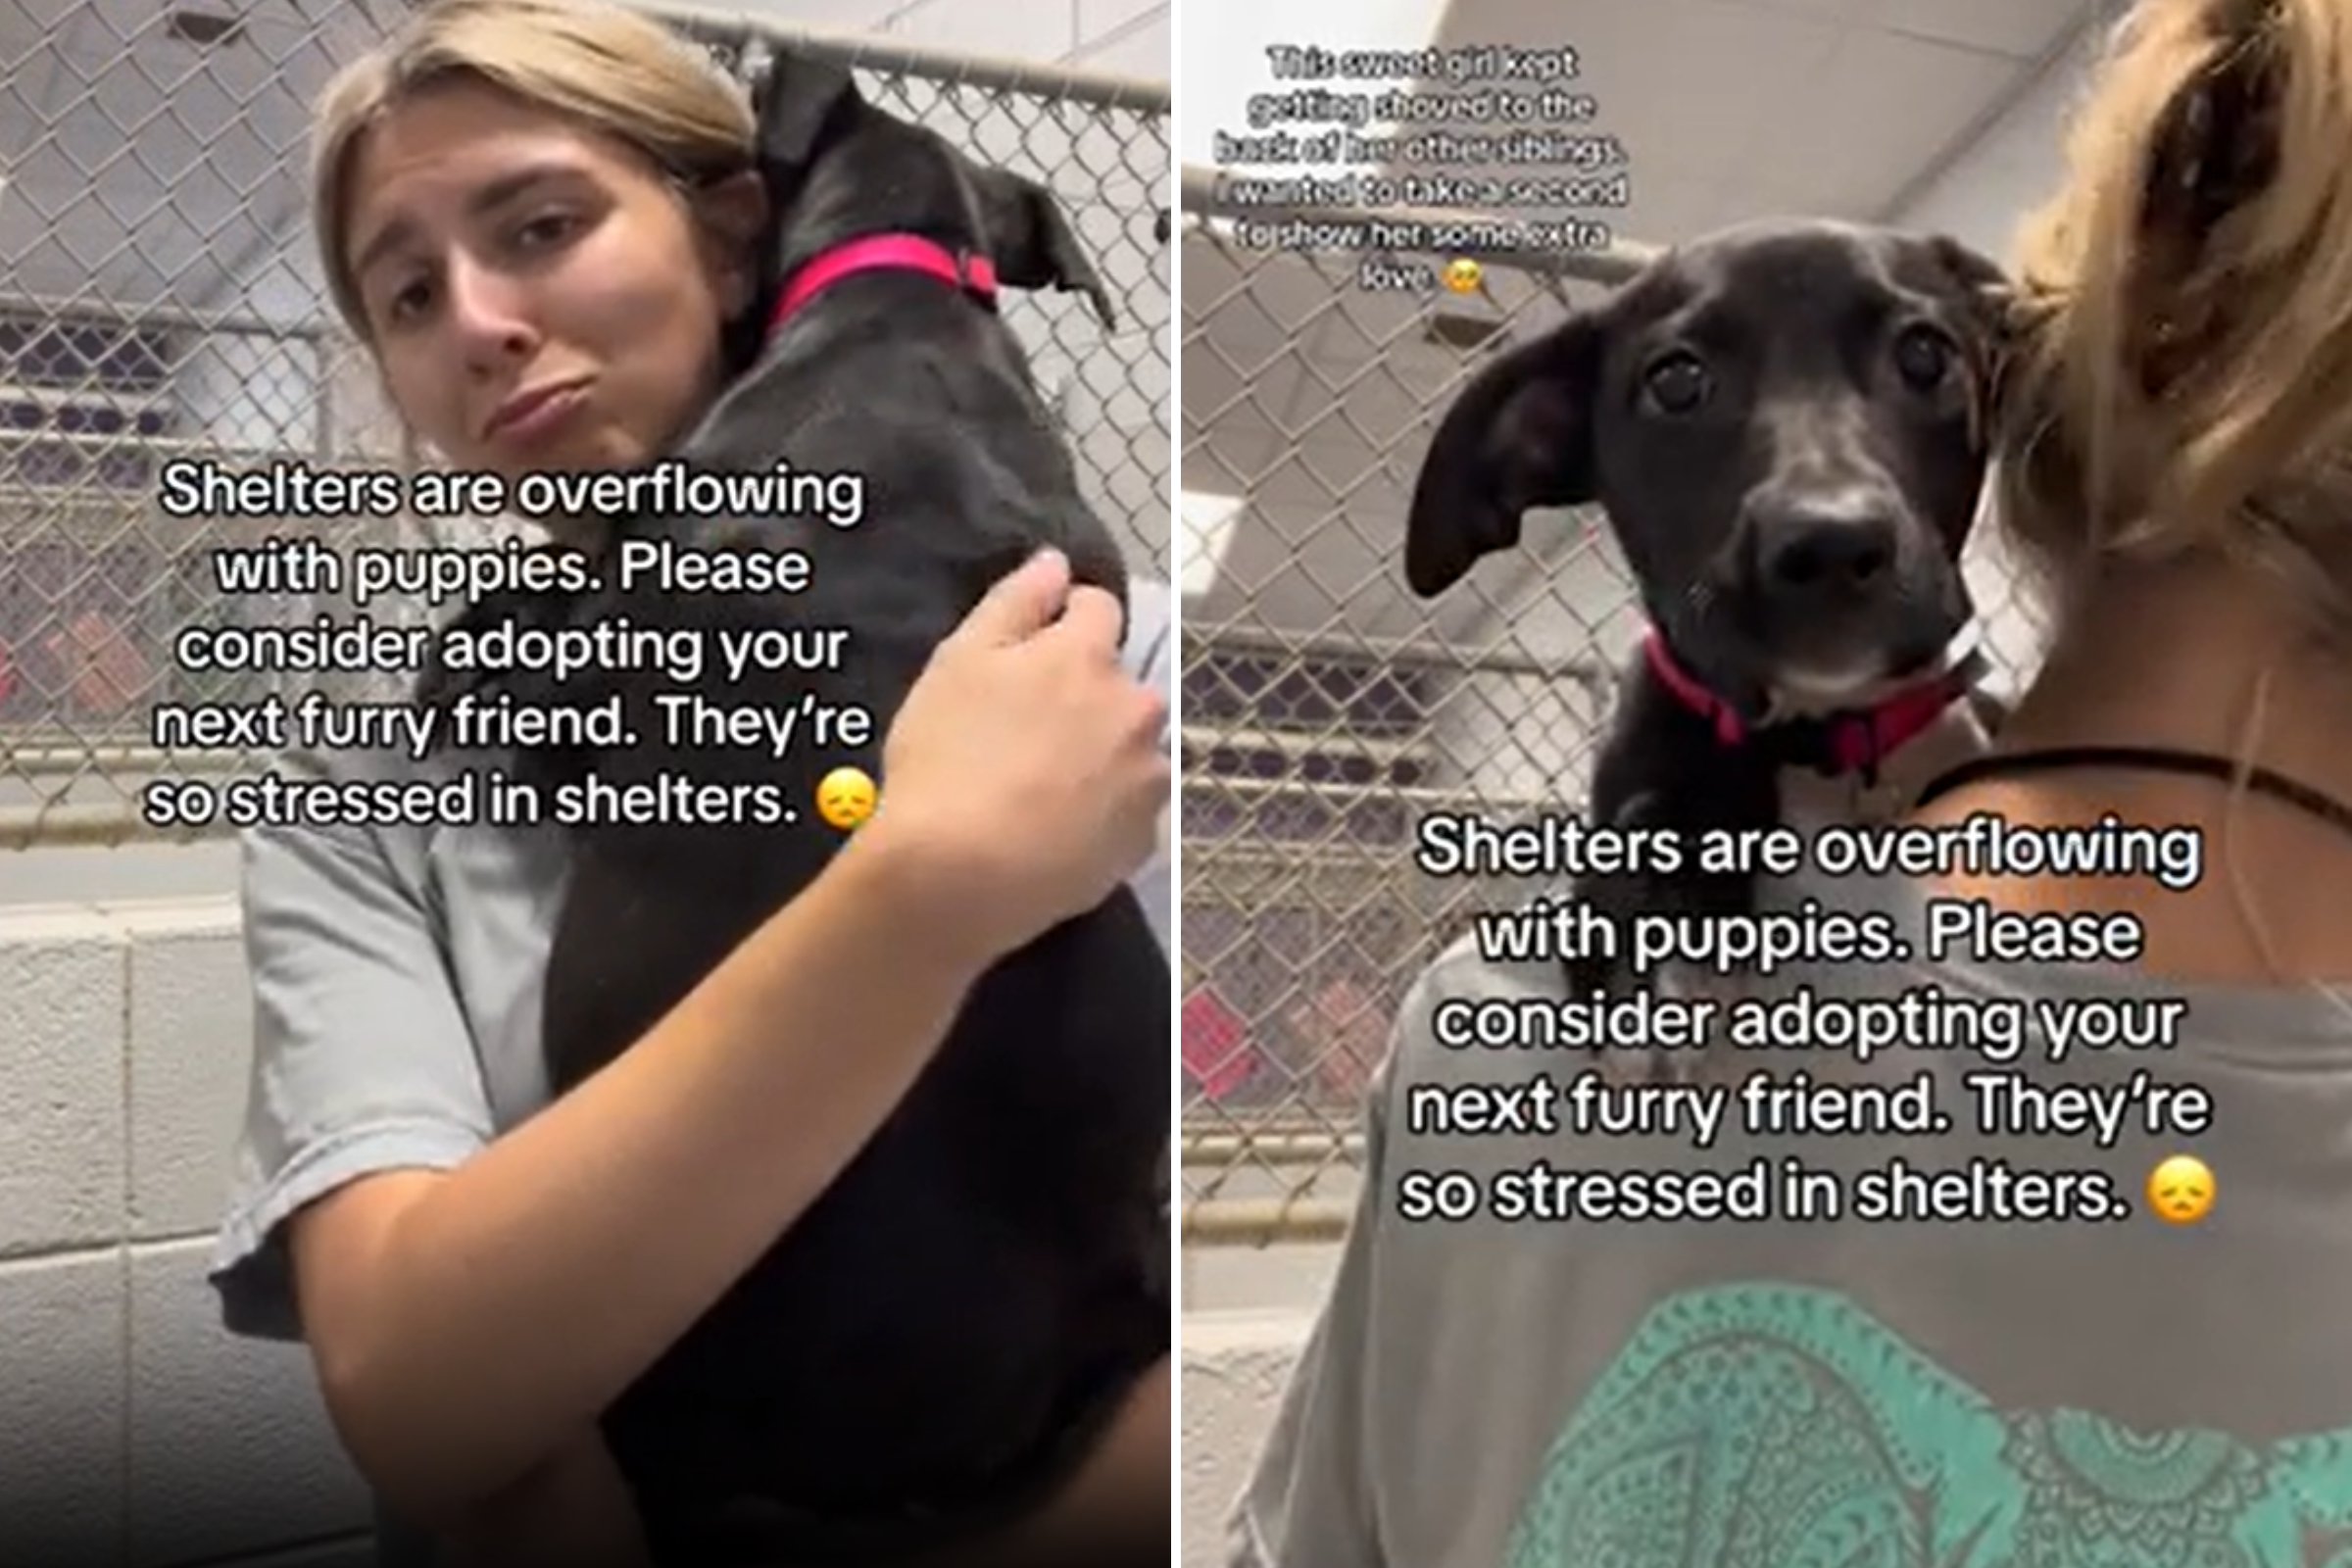 Shelter Overflowing With ‘Stressed’ Puppies Issues Urgent Appeal to Public [Video]